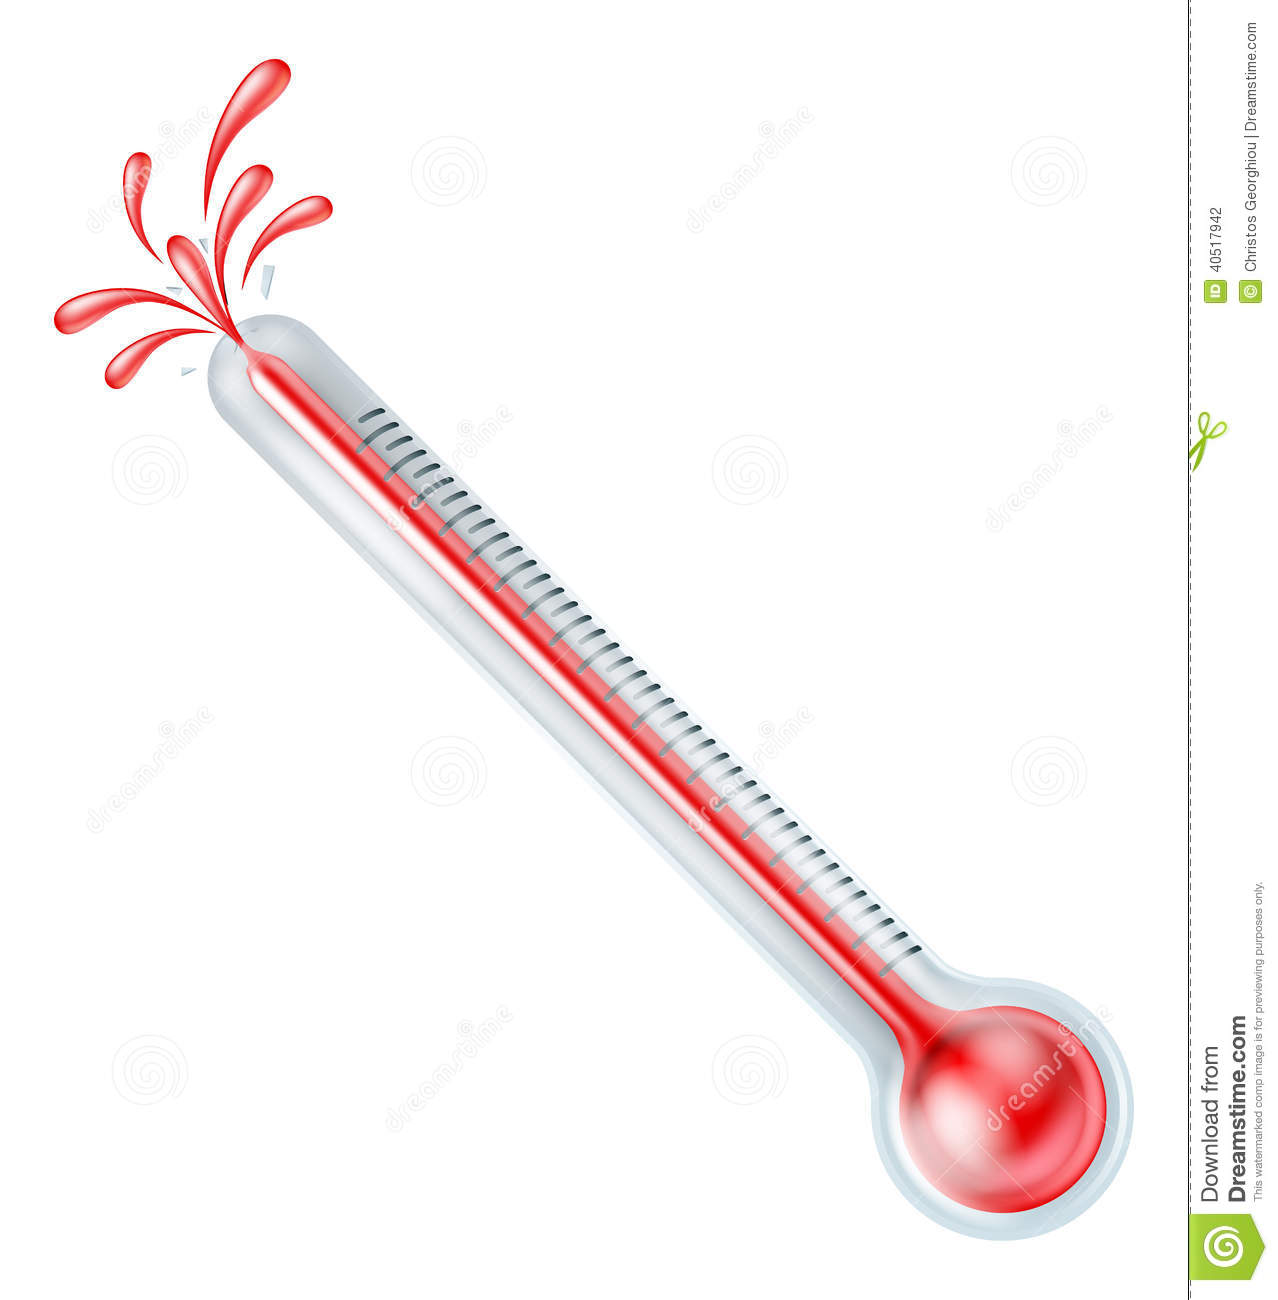 An Illustration Of A Bursting Hot Thermometer With The End Exploding